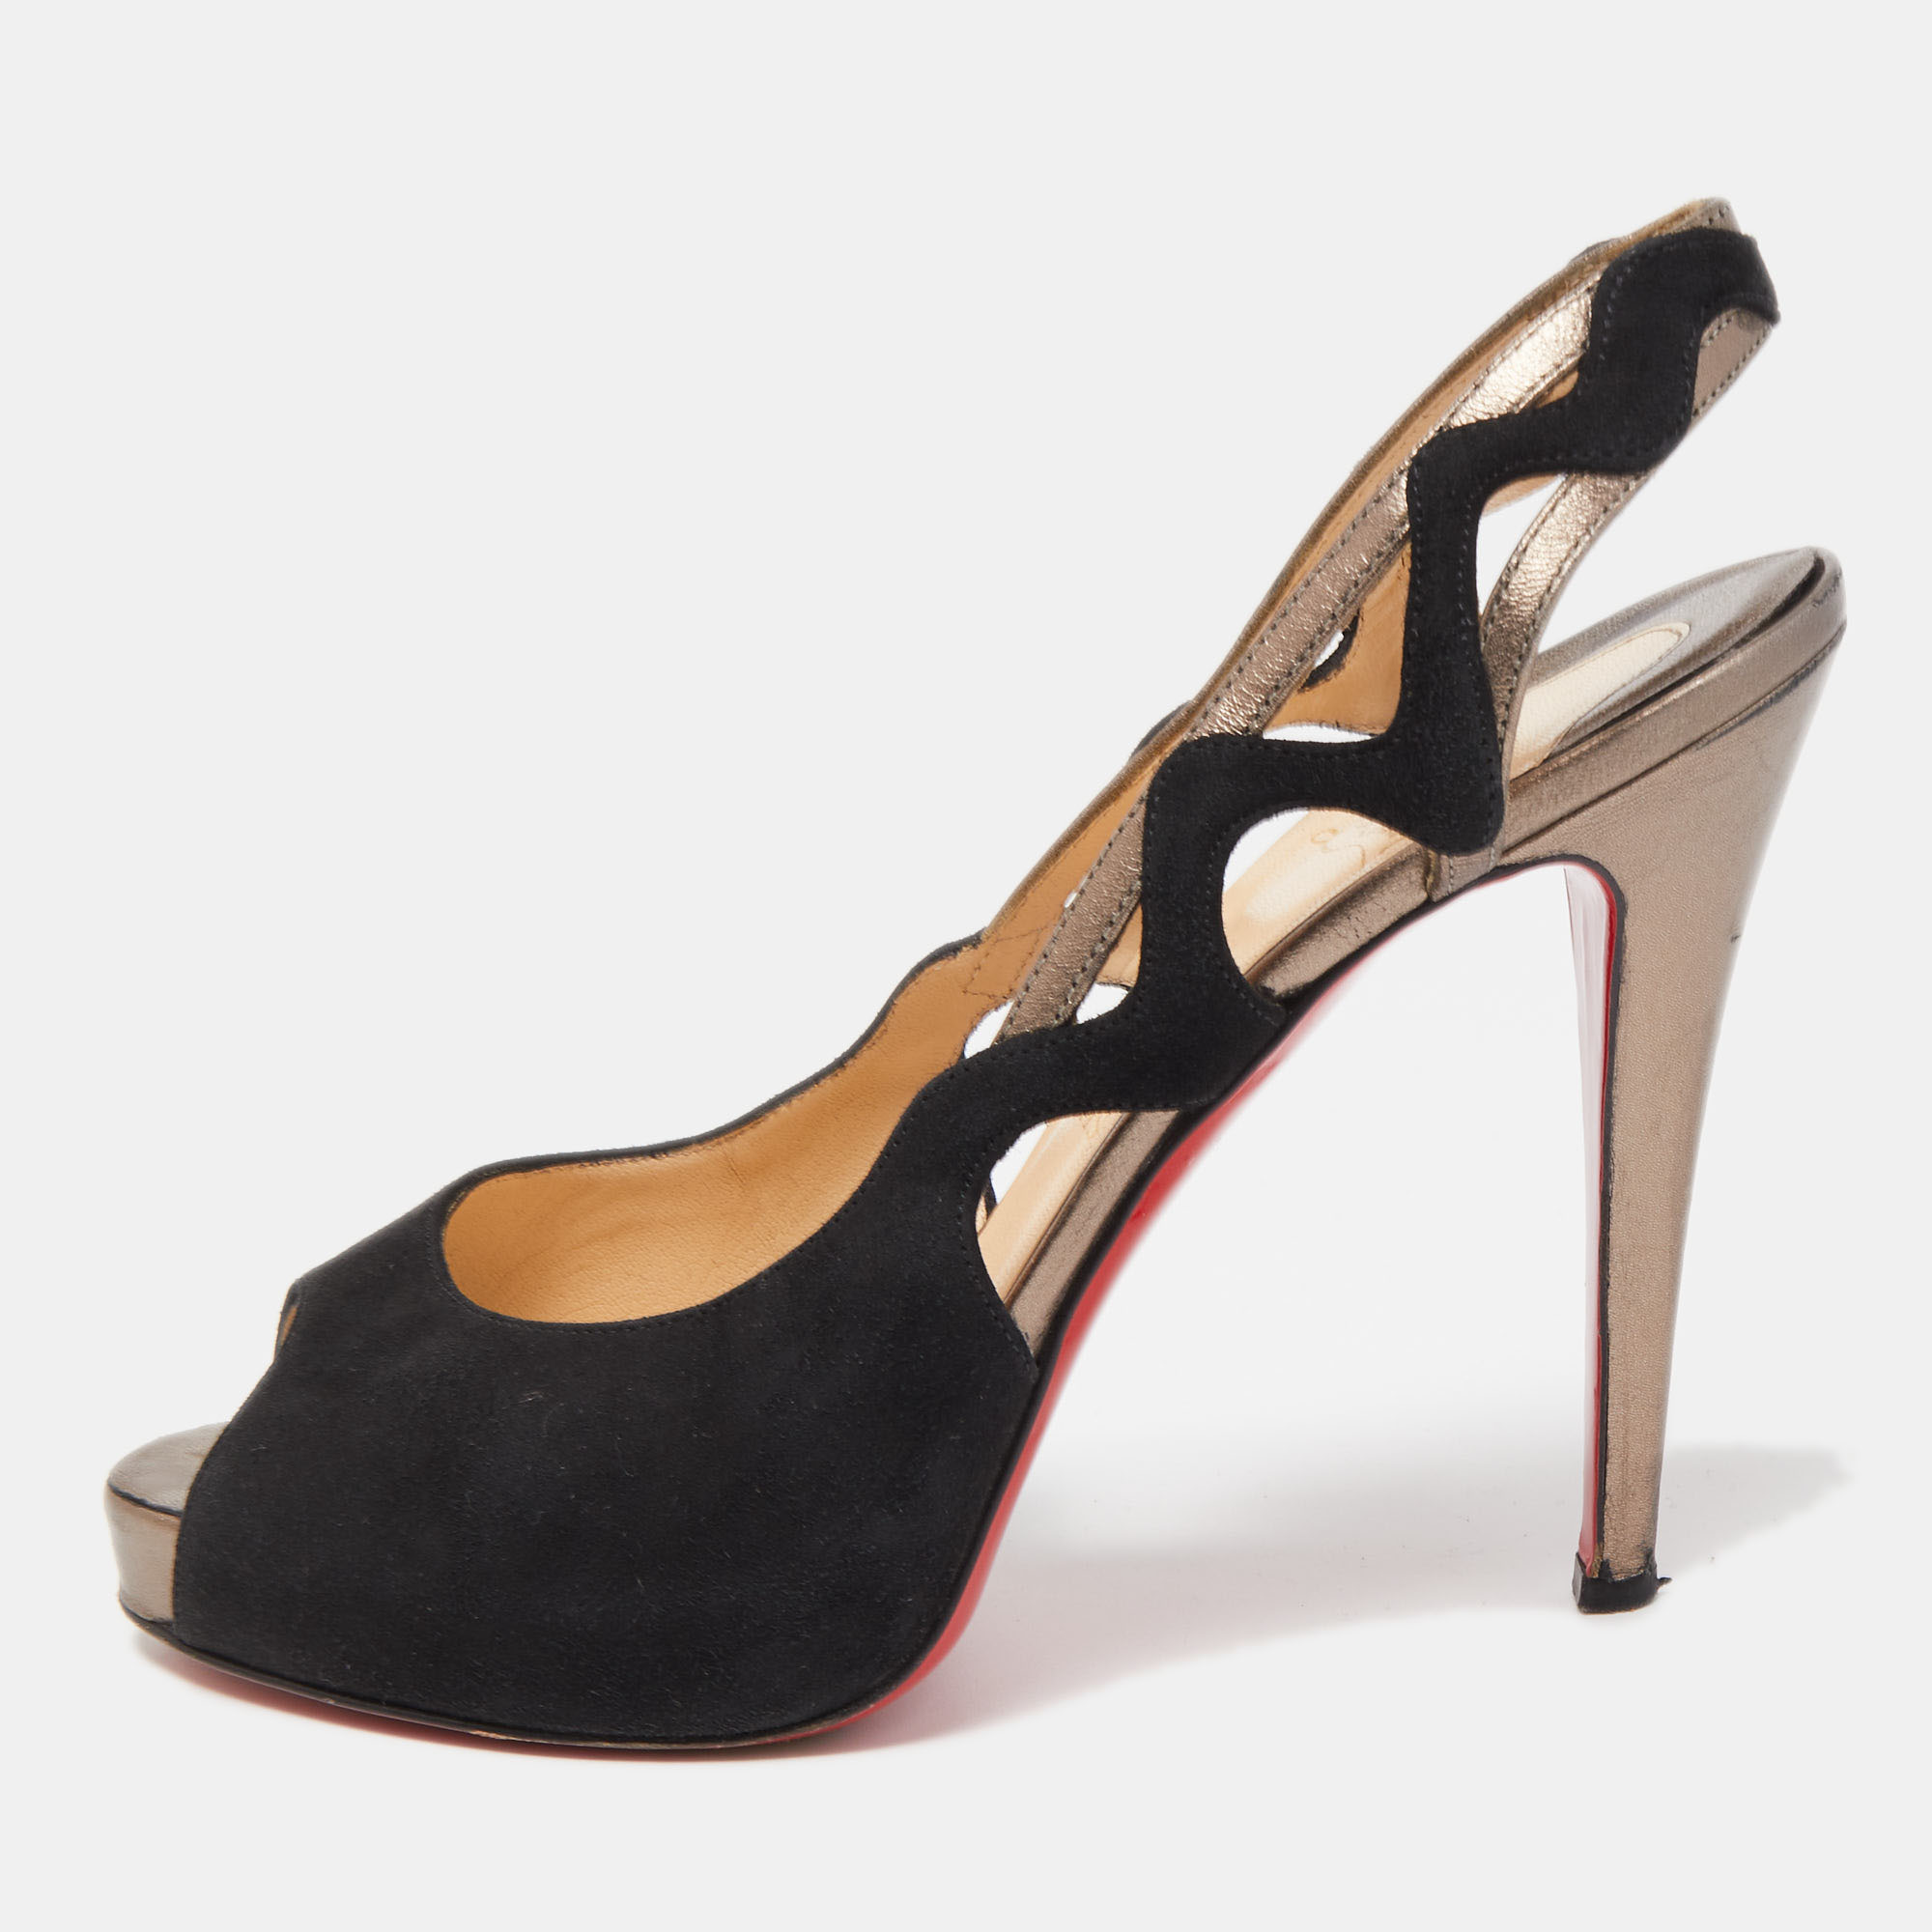 Christian louboutin black suede and leather slingback pumps size 38.5